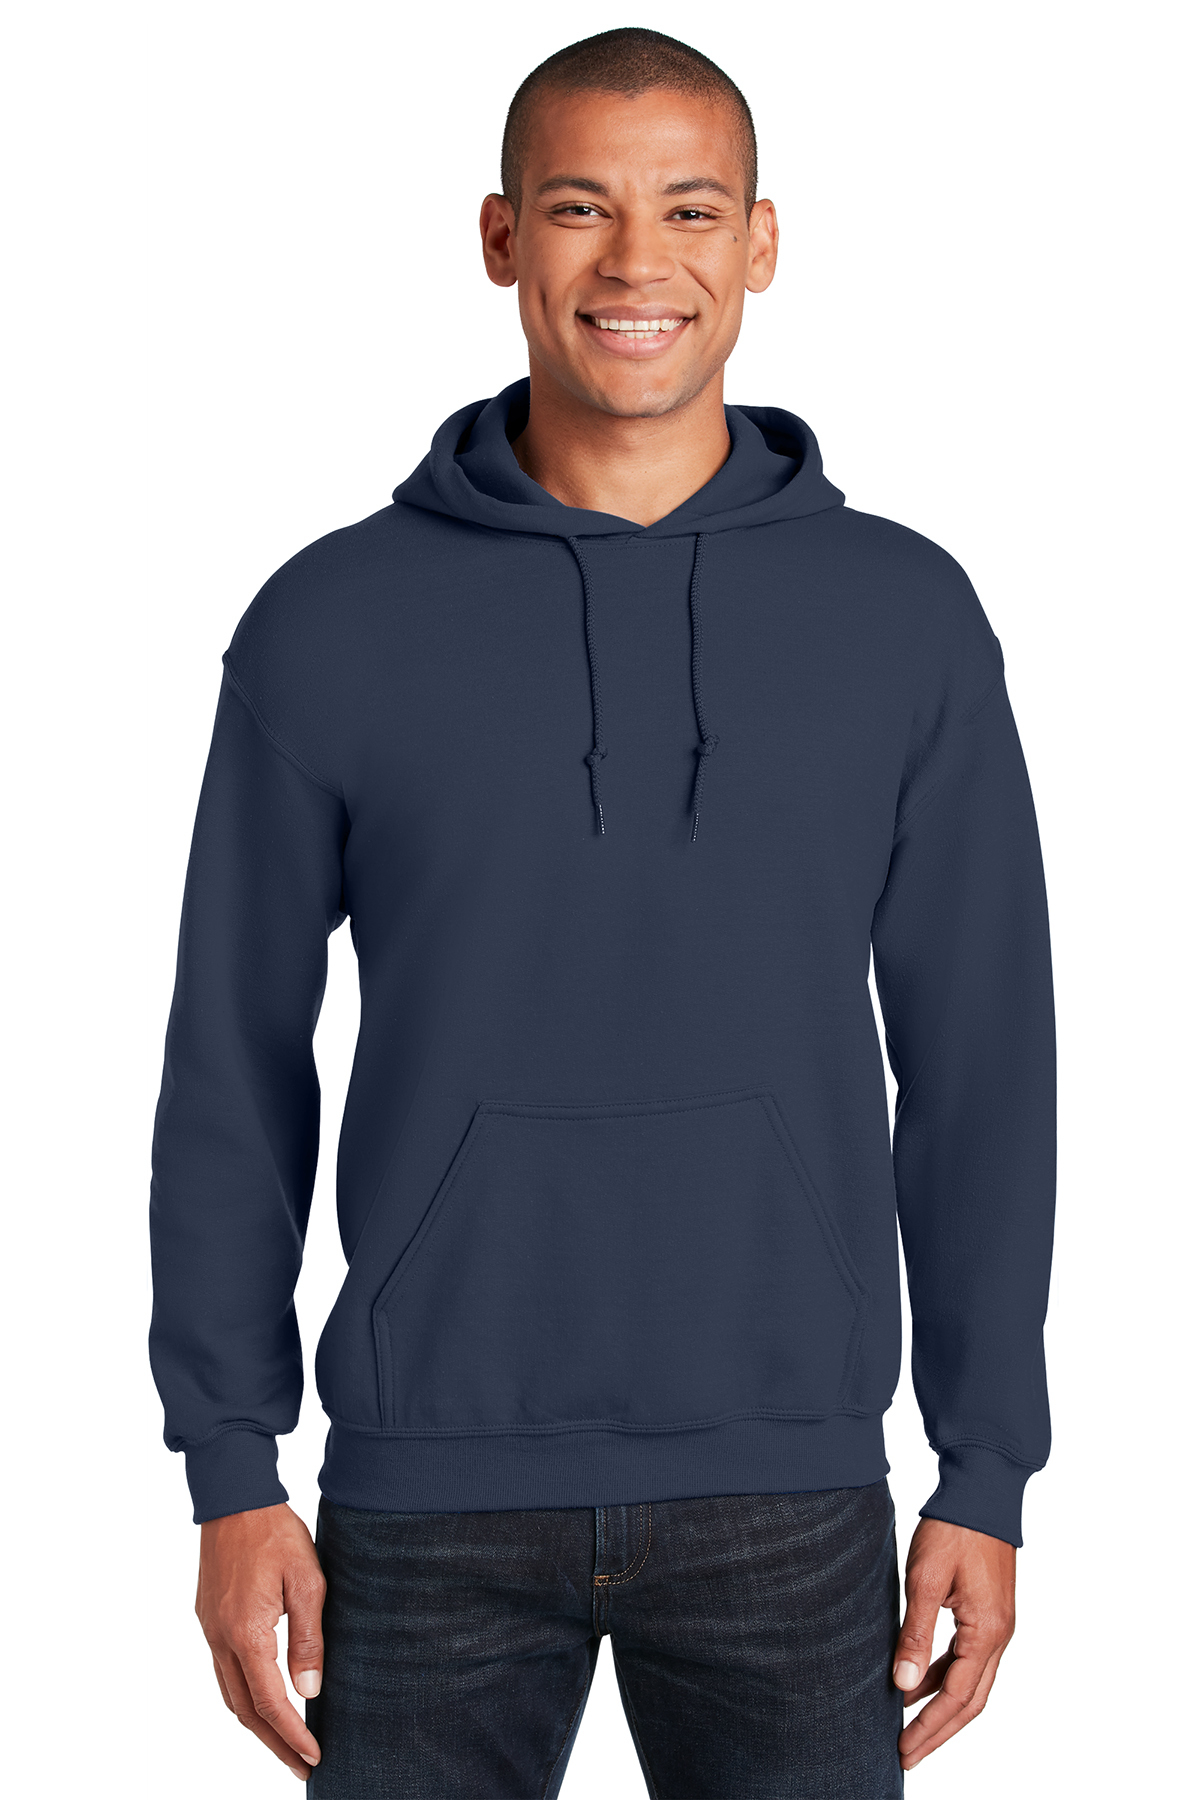 FLA-Navy color Hooded sweat shirt with logo